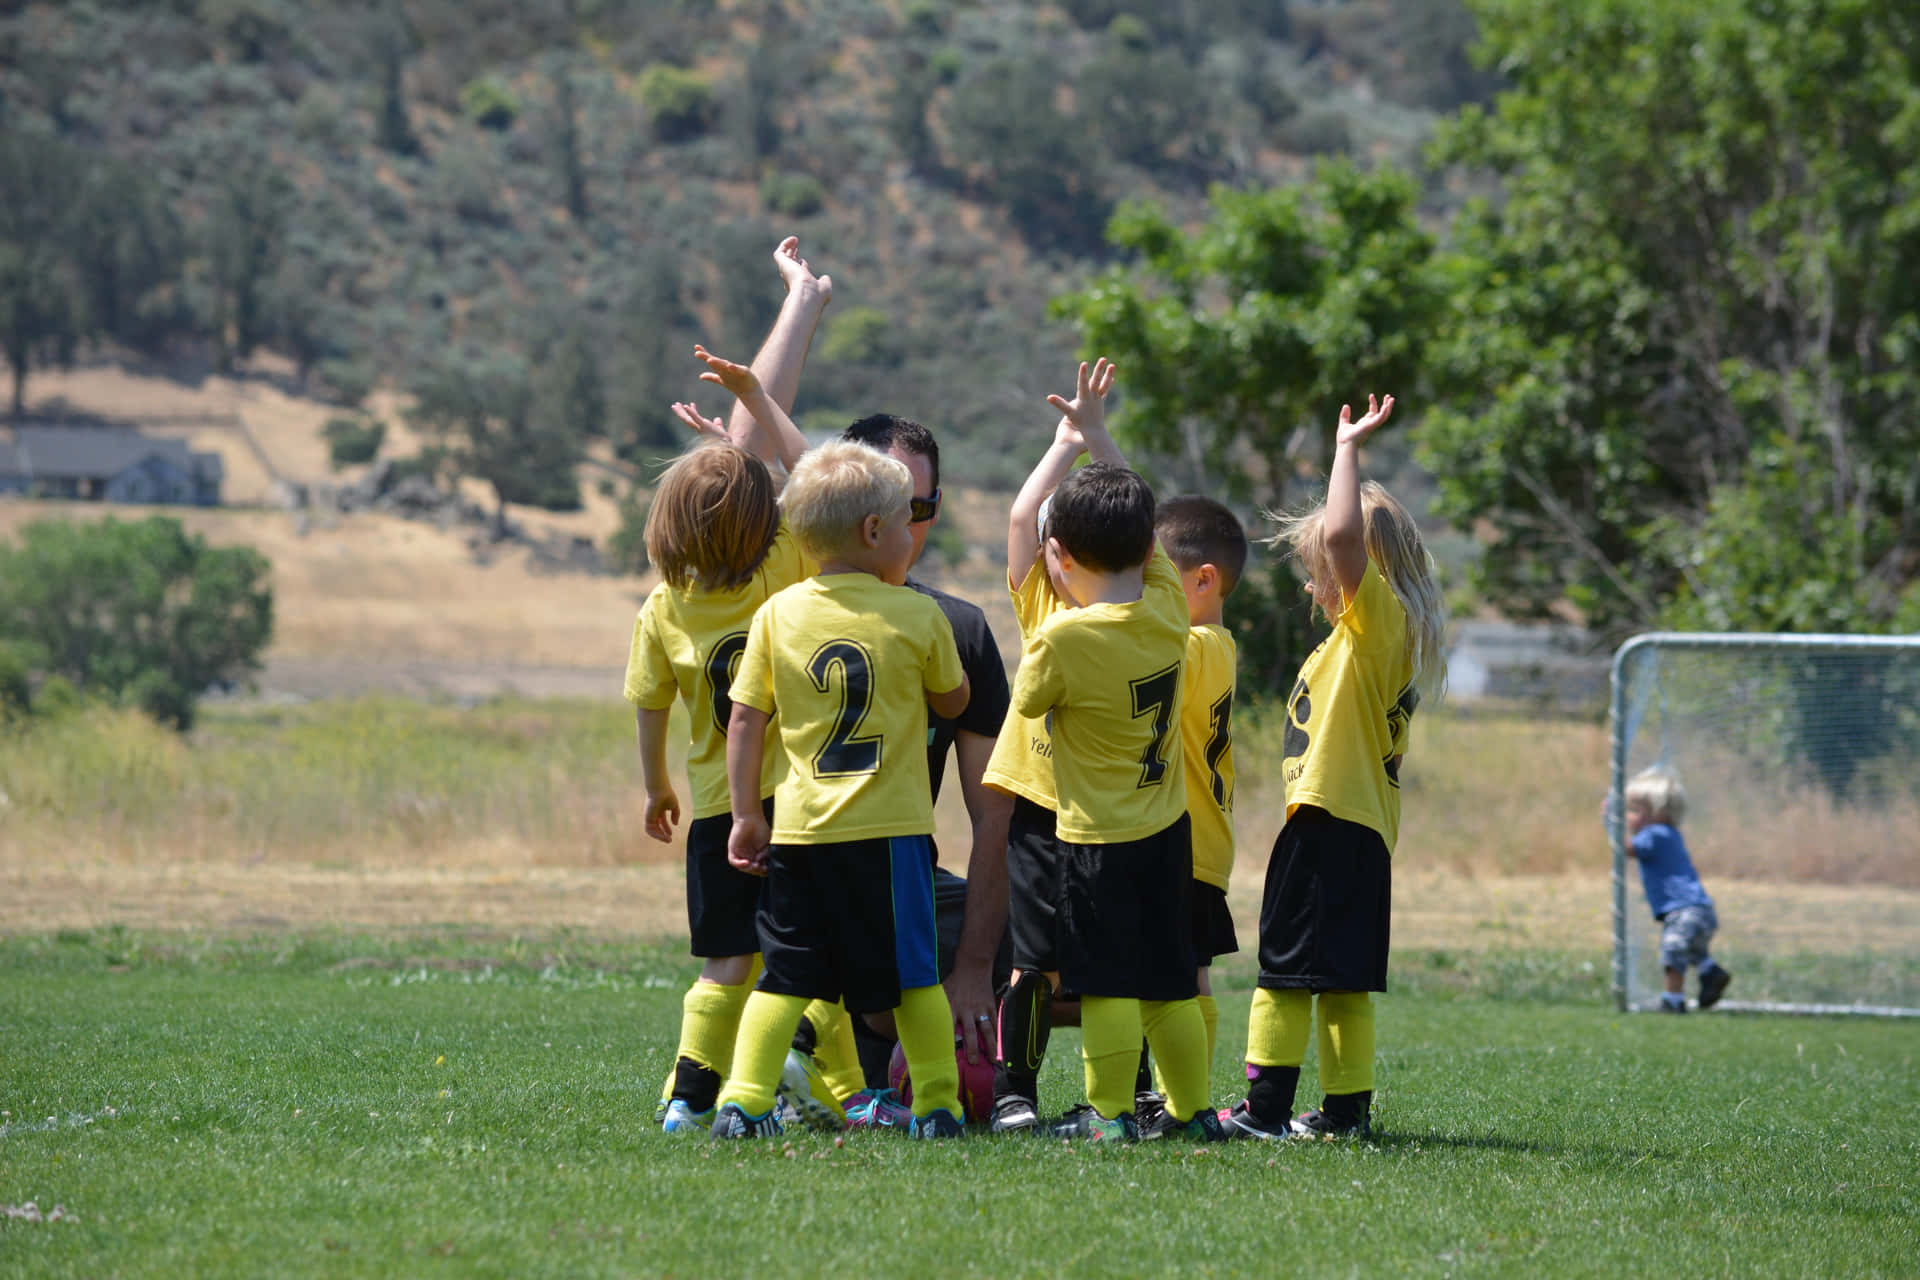 A Group Of Kids Playing Soccer